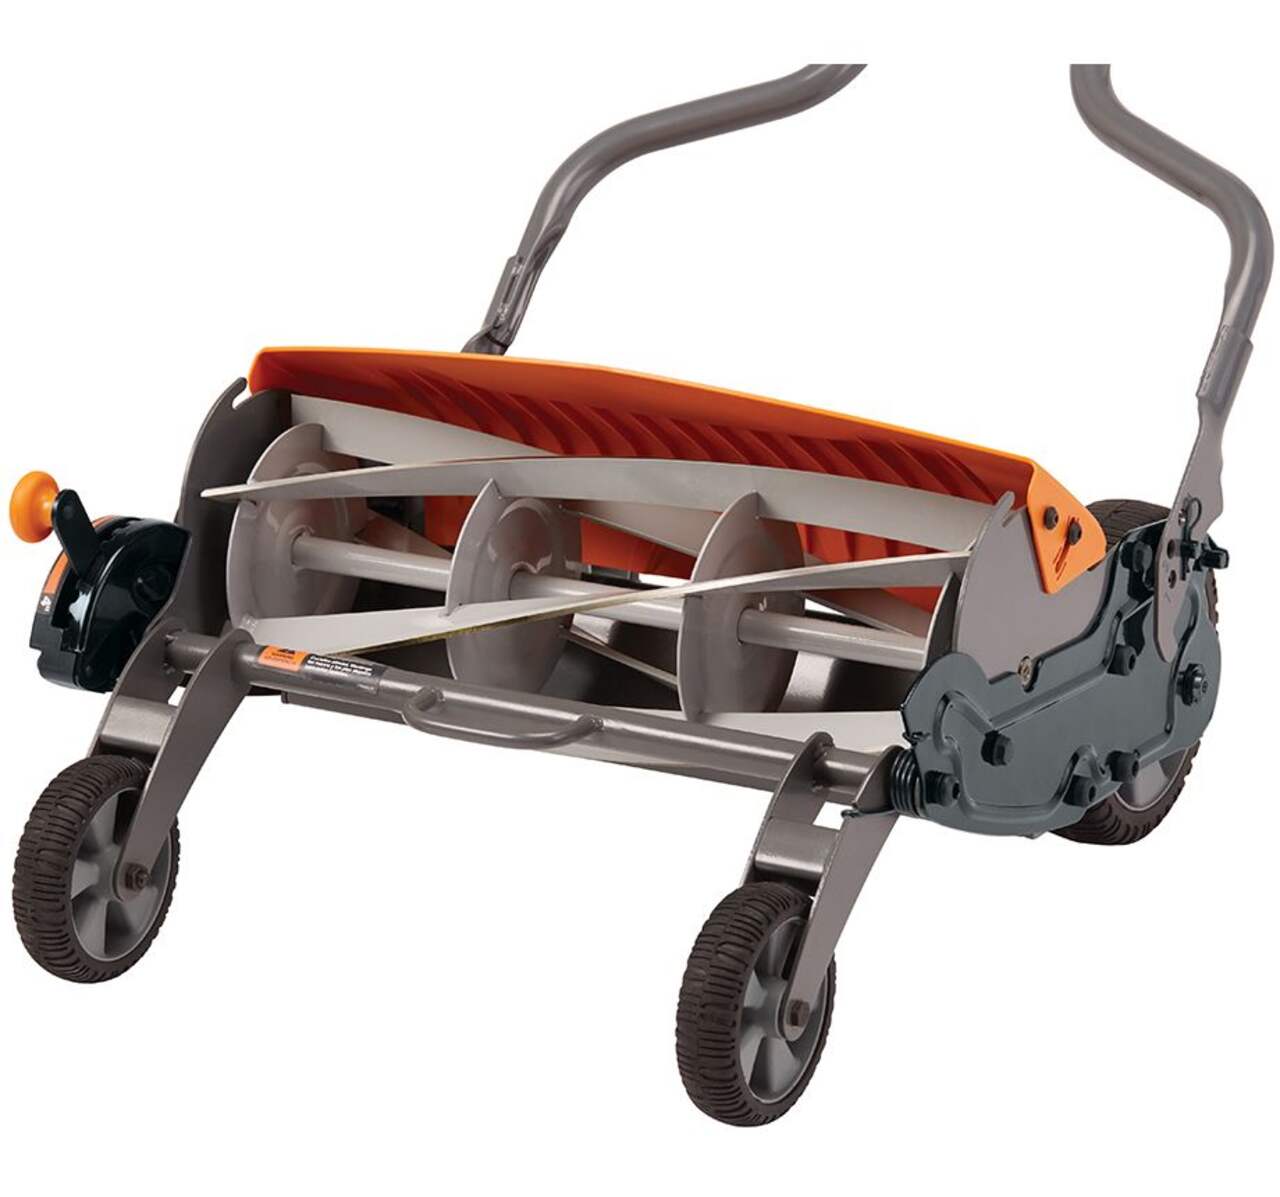 Going Reviews: Fiskars StaySharp Max Reel Mower - The Healthiest Way to  Mow! - Going Dad